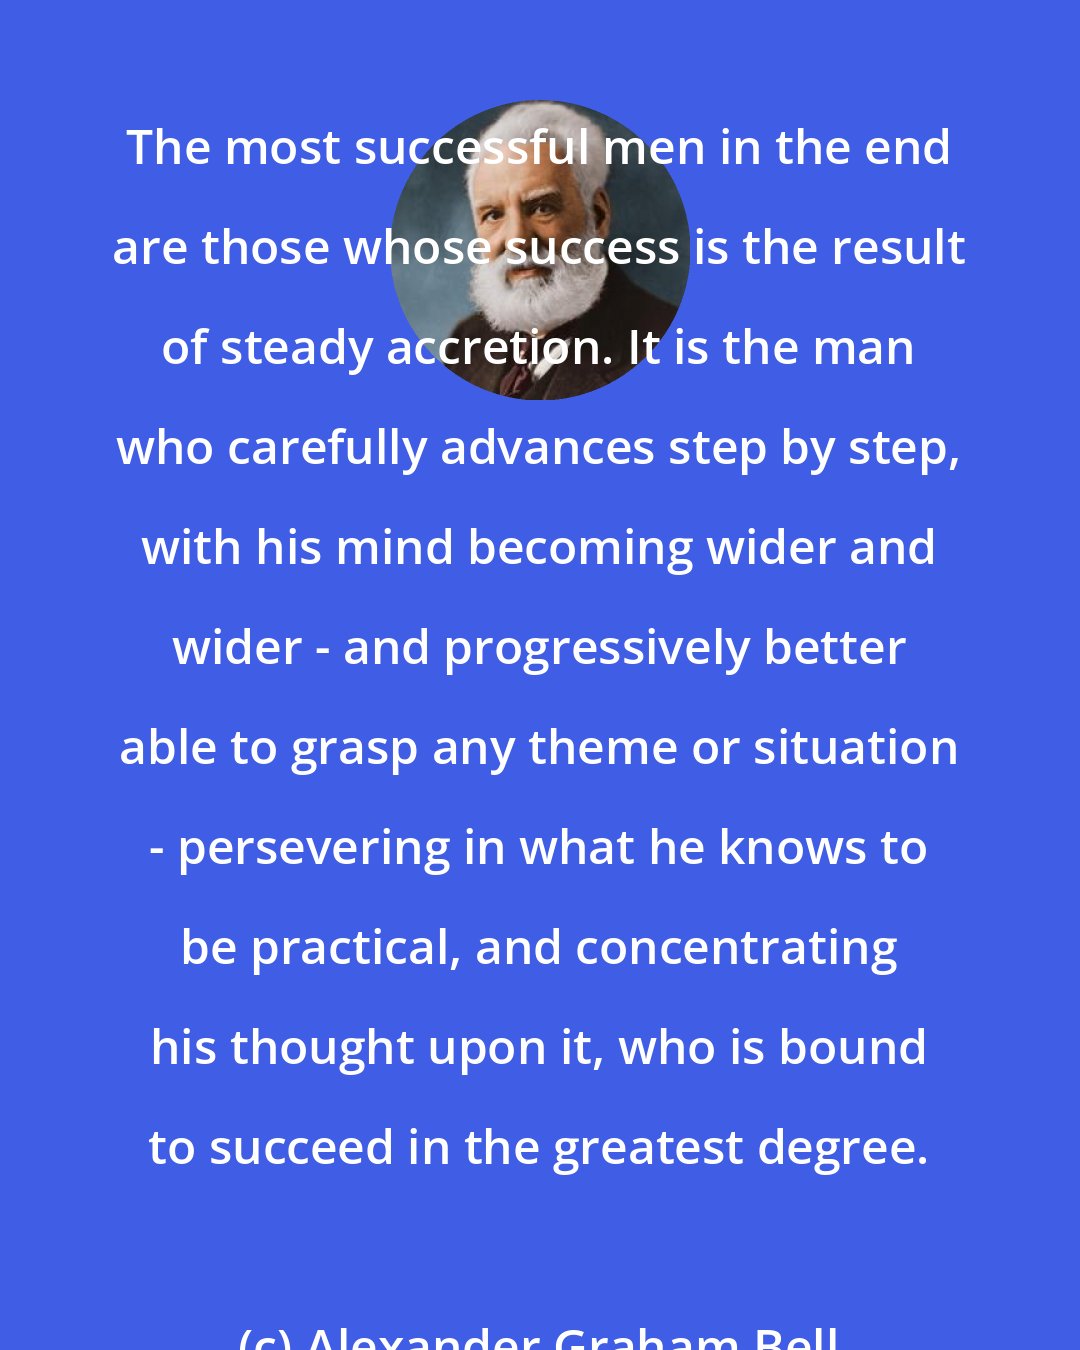 Alexander Graham Bell: The most successful men in the end are those whose success is the result of steady accretion. It is the man who carefully advances step by step, with his mind becoming wider and wider - and progressively better able to grasp any theme or situation - persevering in what he knows to be practical, and concentrating his thought upon it, who is bound to succeed in the greatest degree.